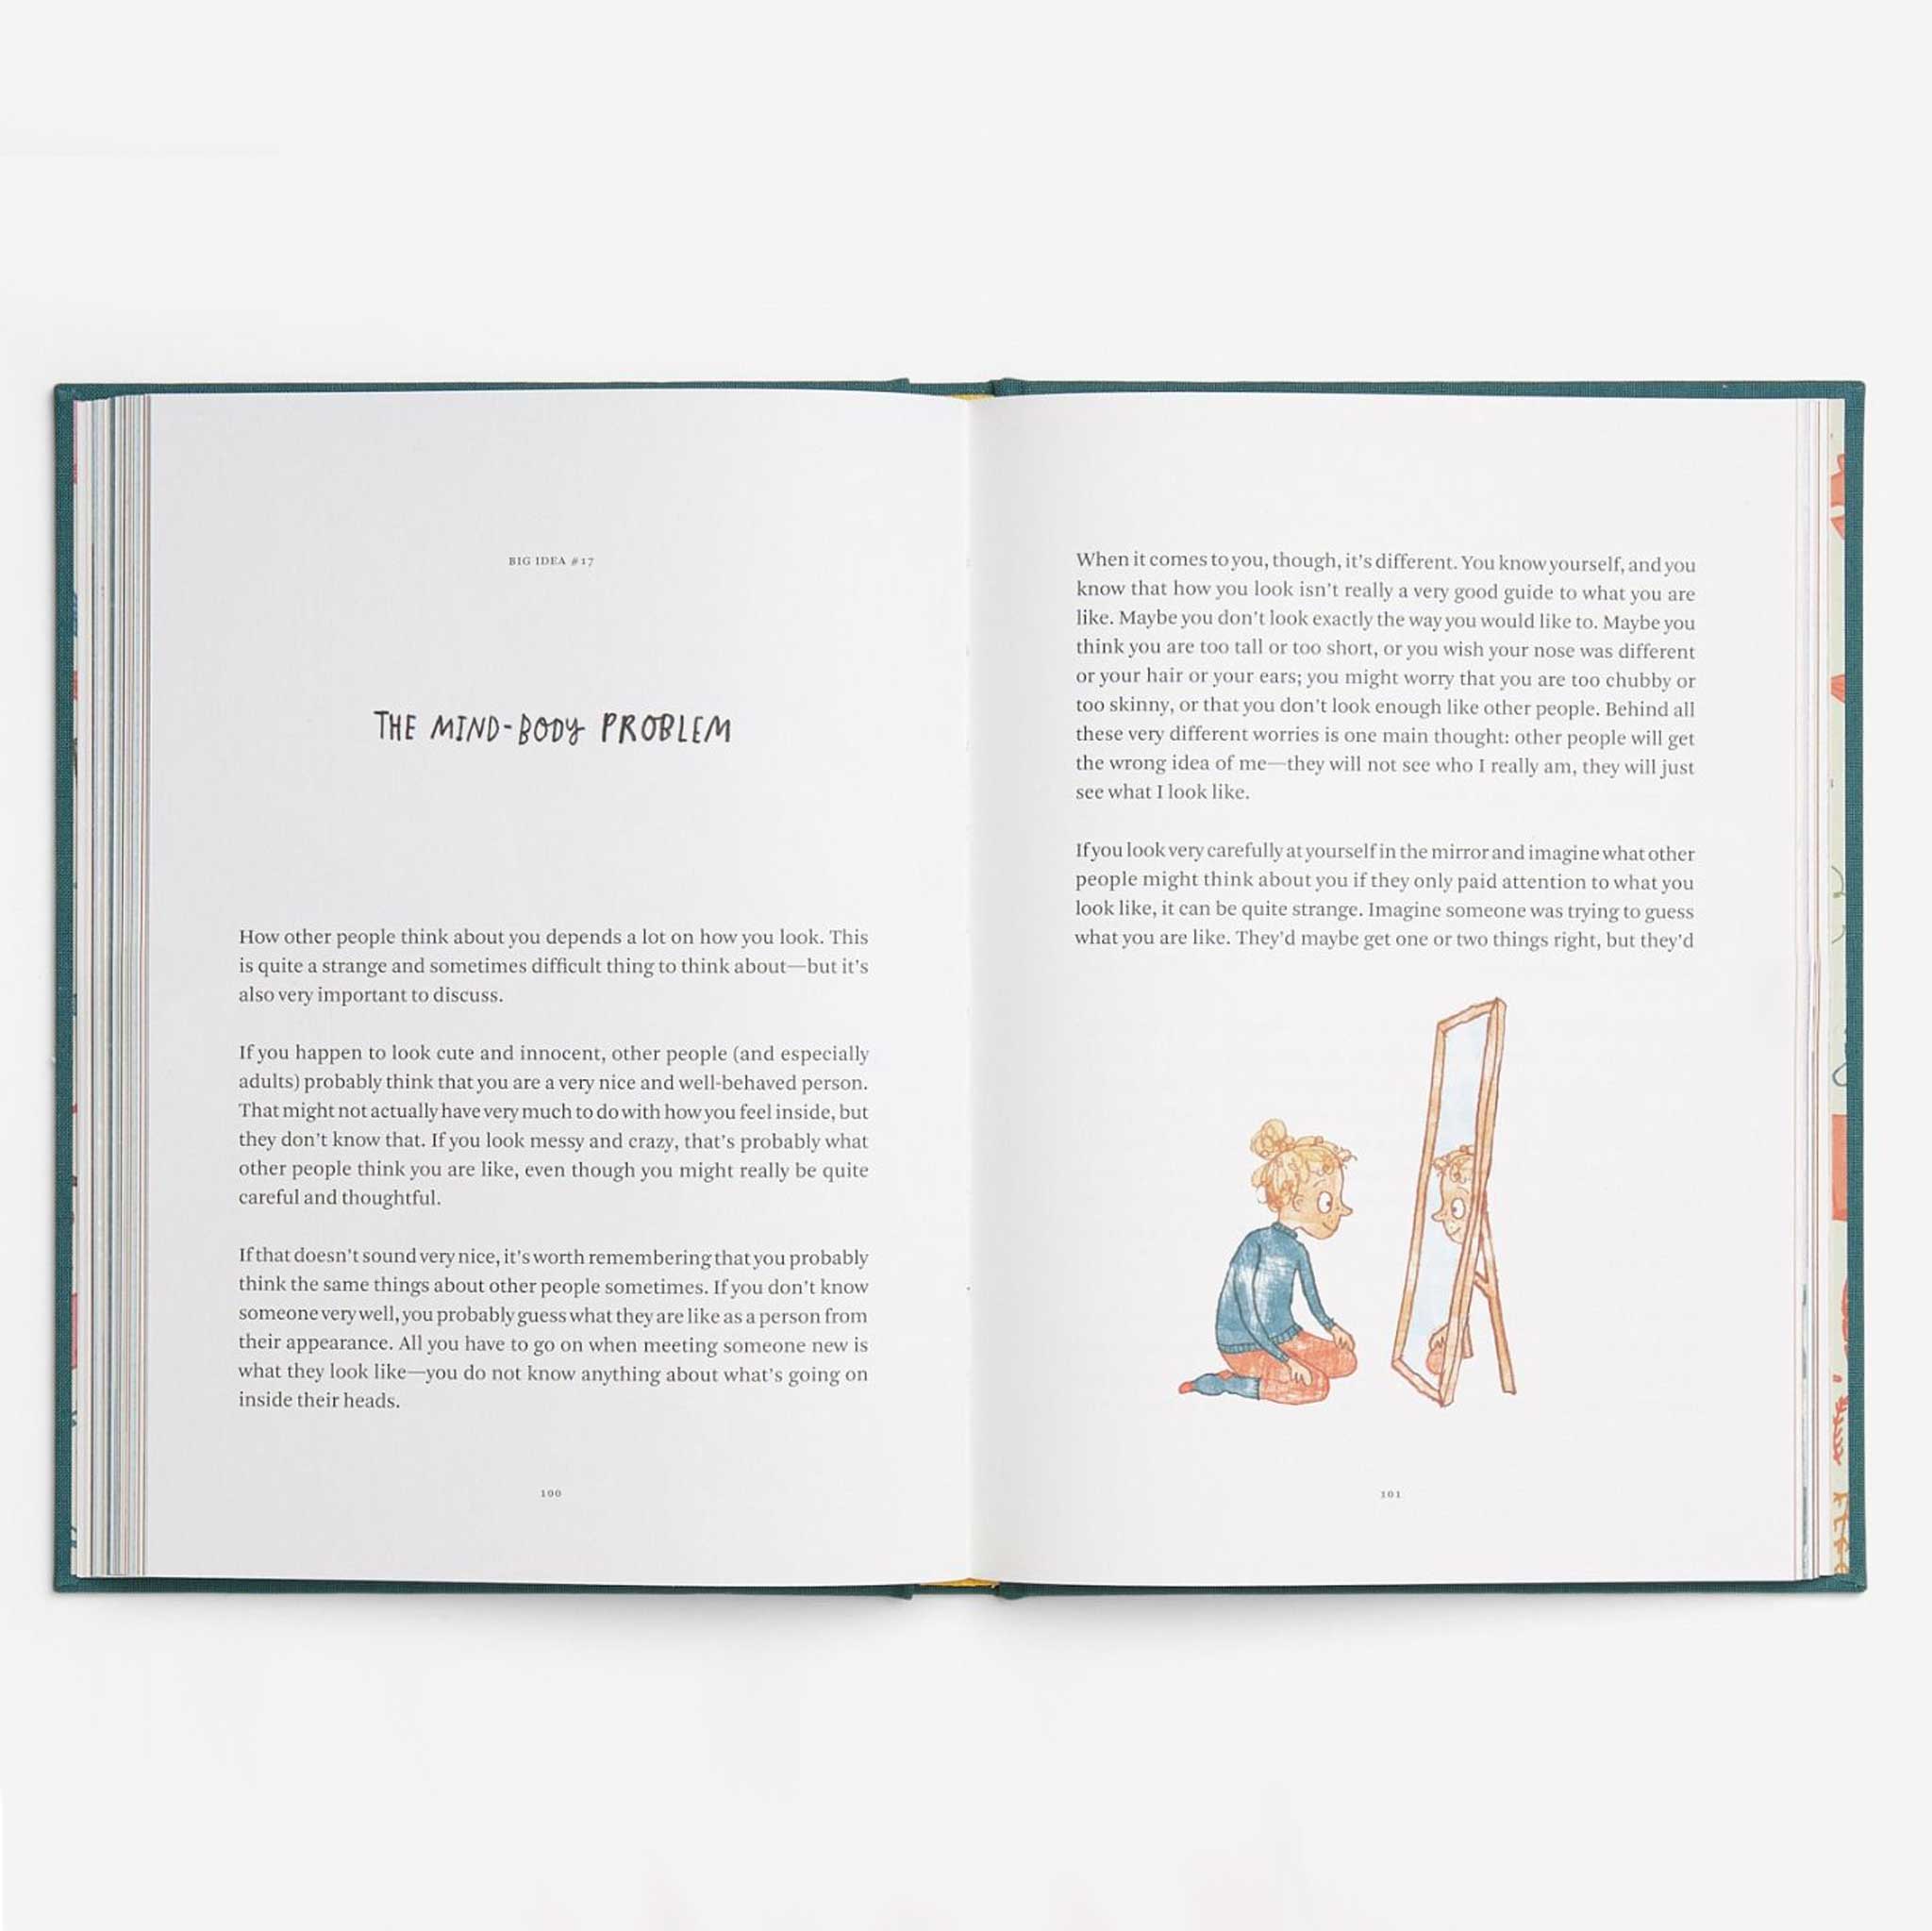 BIG IDEAS FOR CURIOUS MINDS | PHILOSOPHIE BUCH für KINDER | English Edition | The School of Life - Charles & Marie